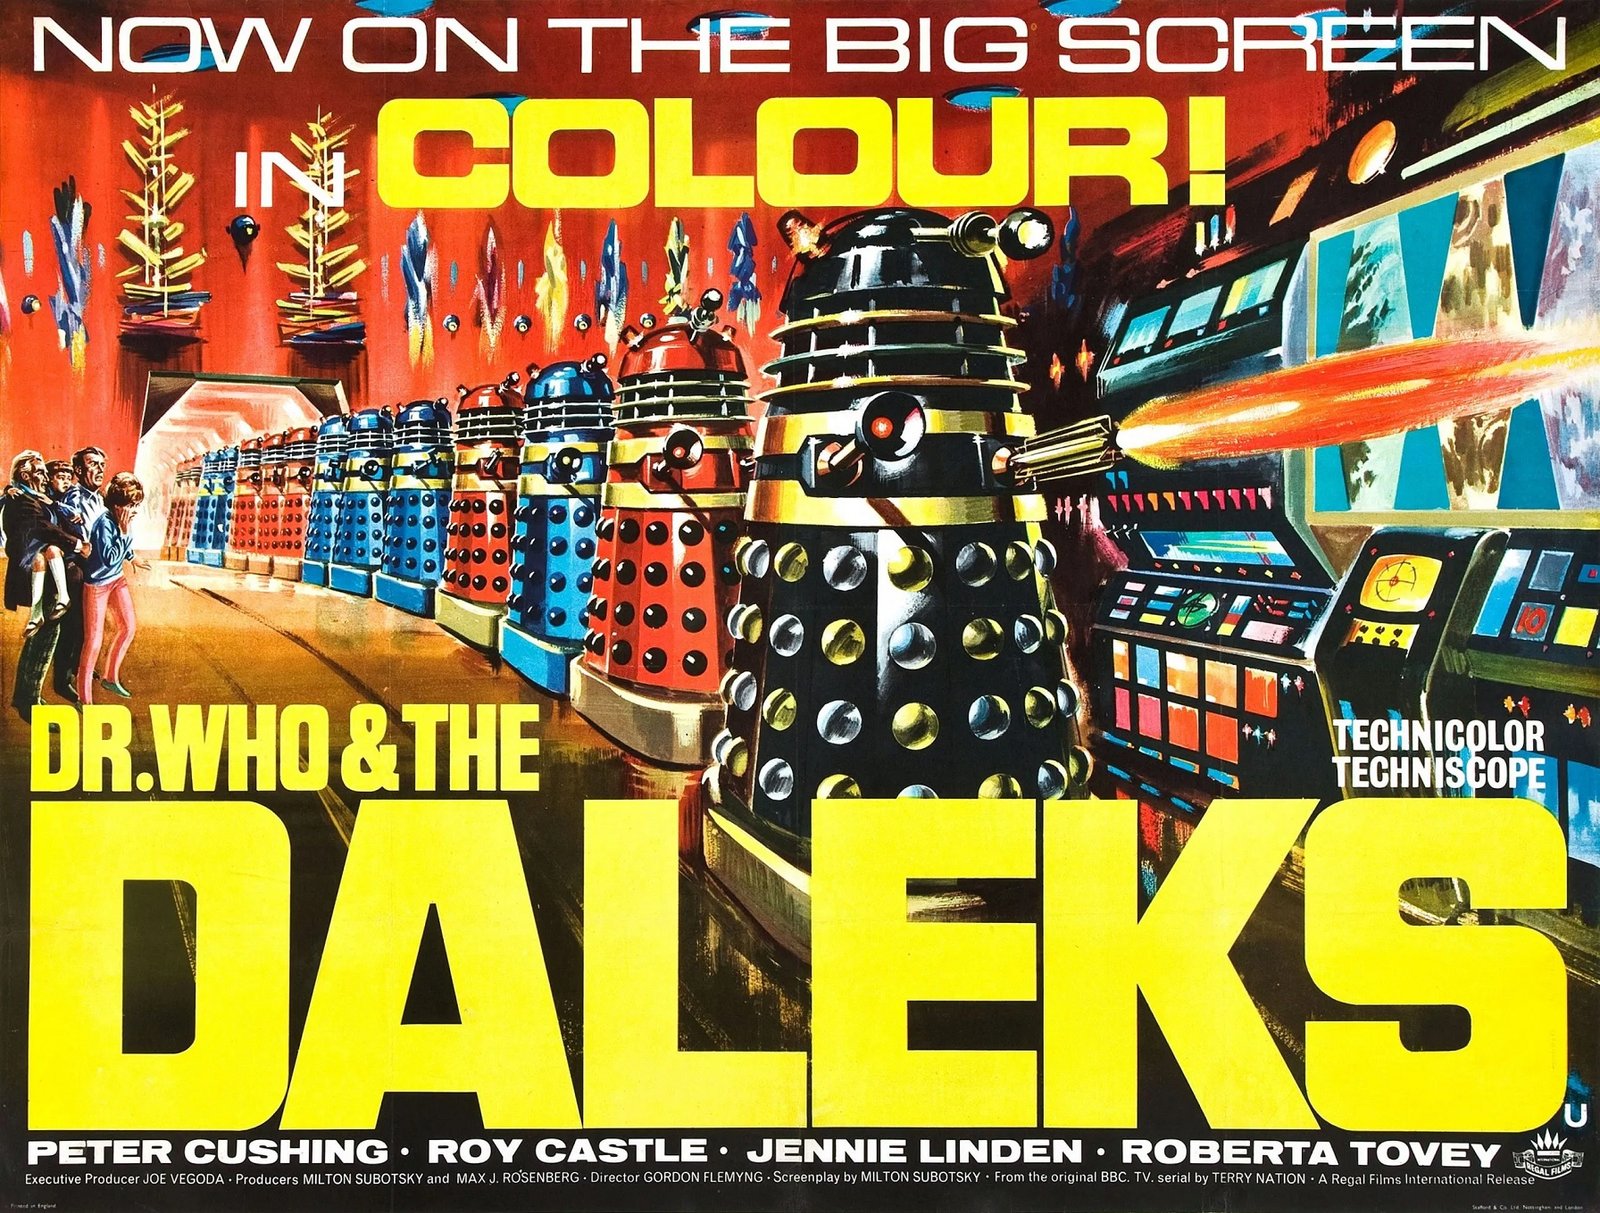 Dr Who and the Daleks to Air on Talking Pictures TV Next Month